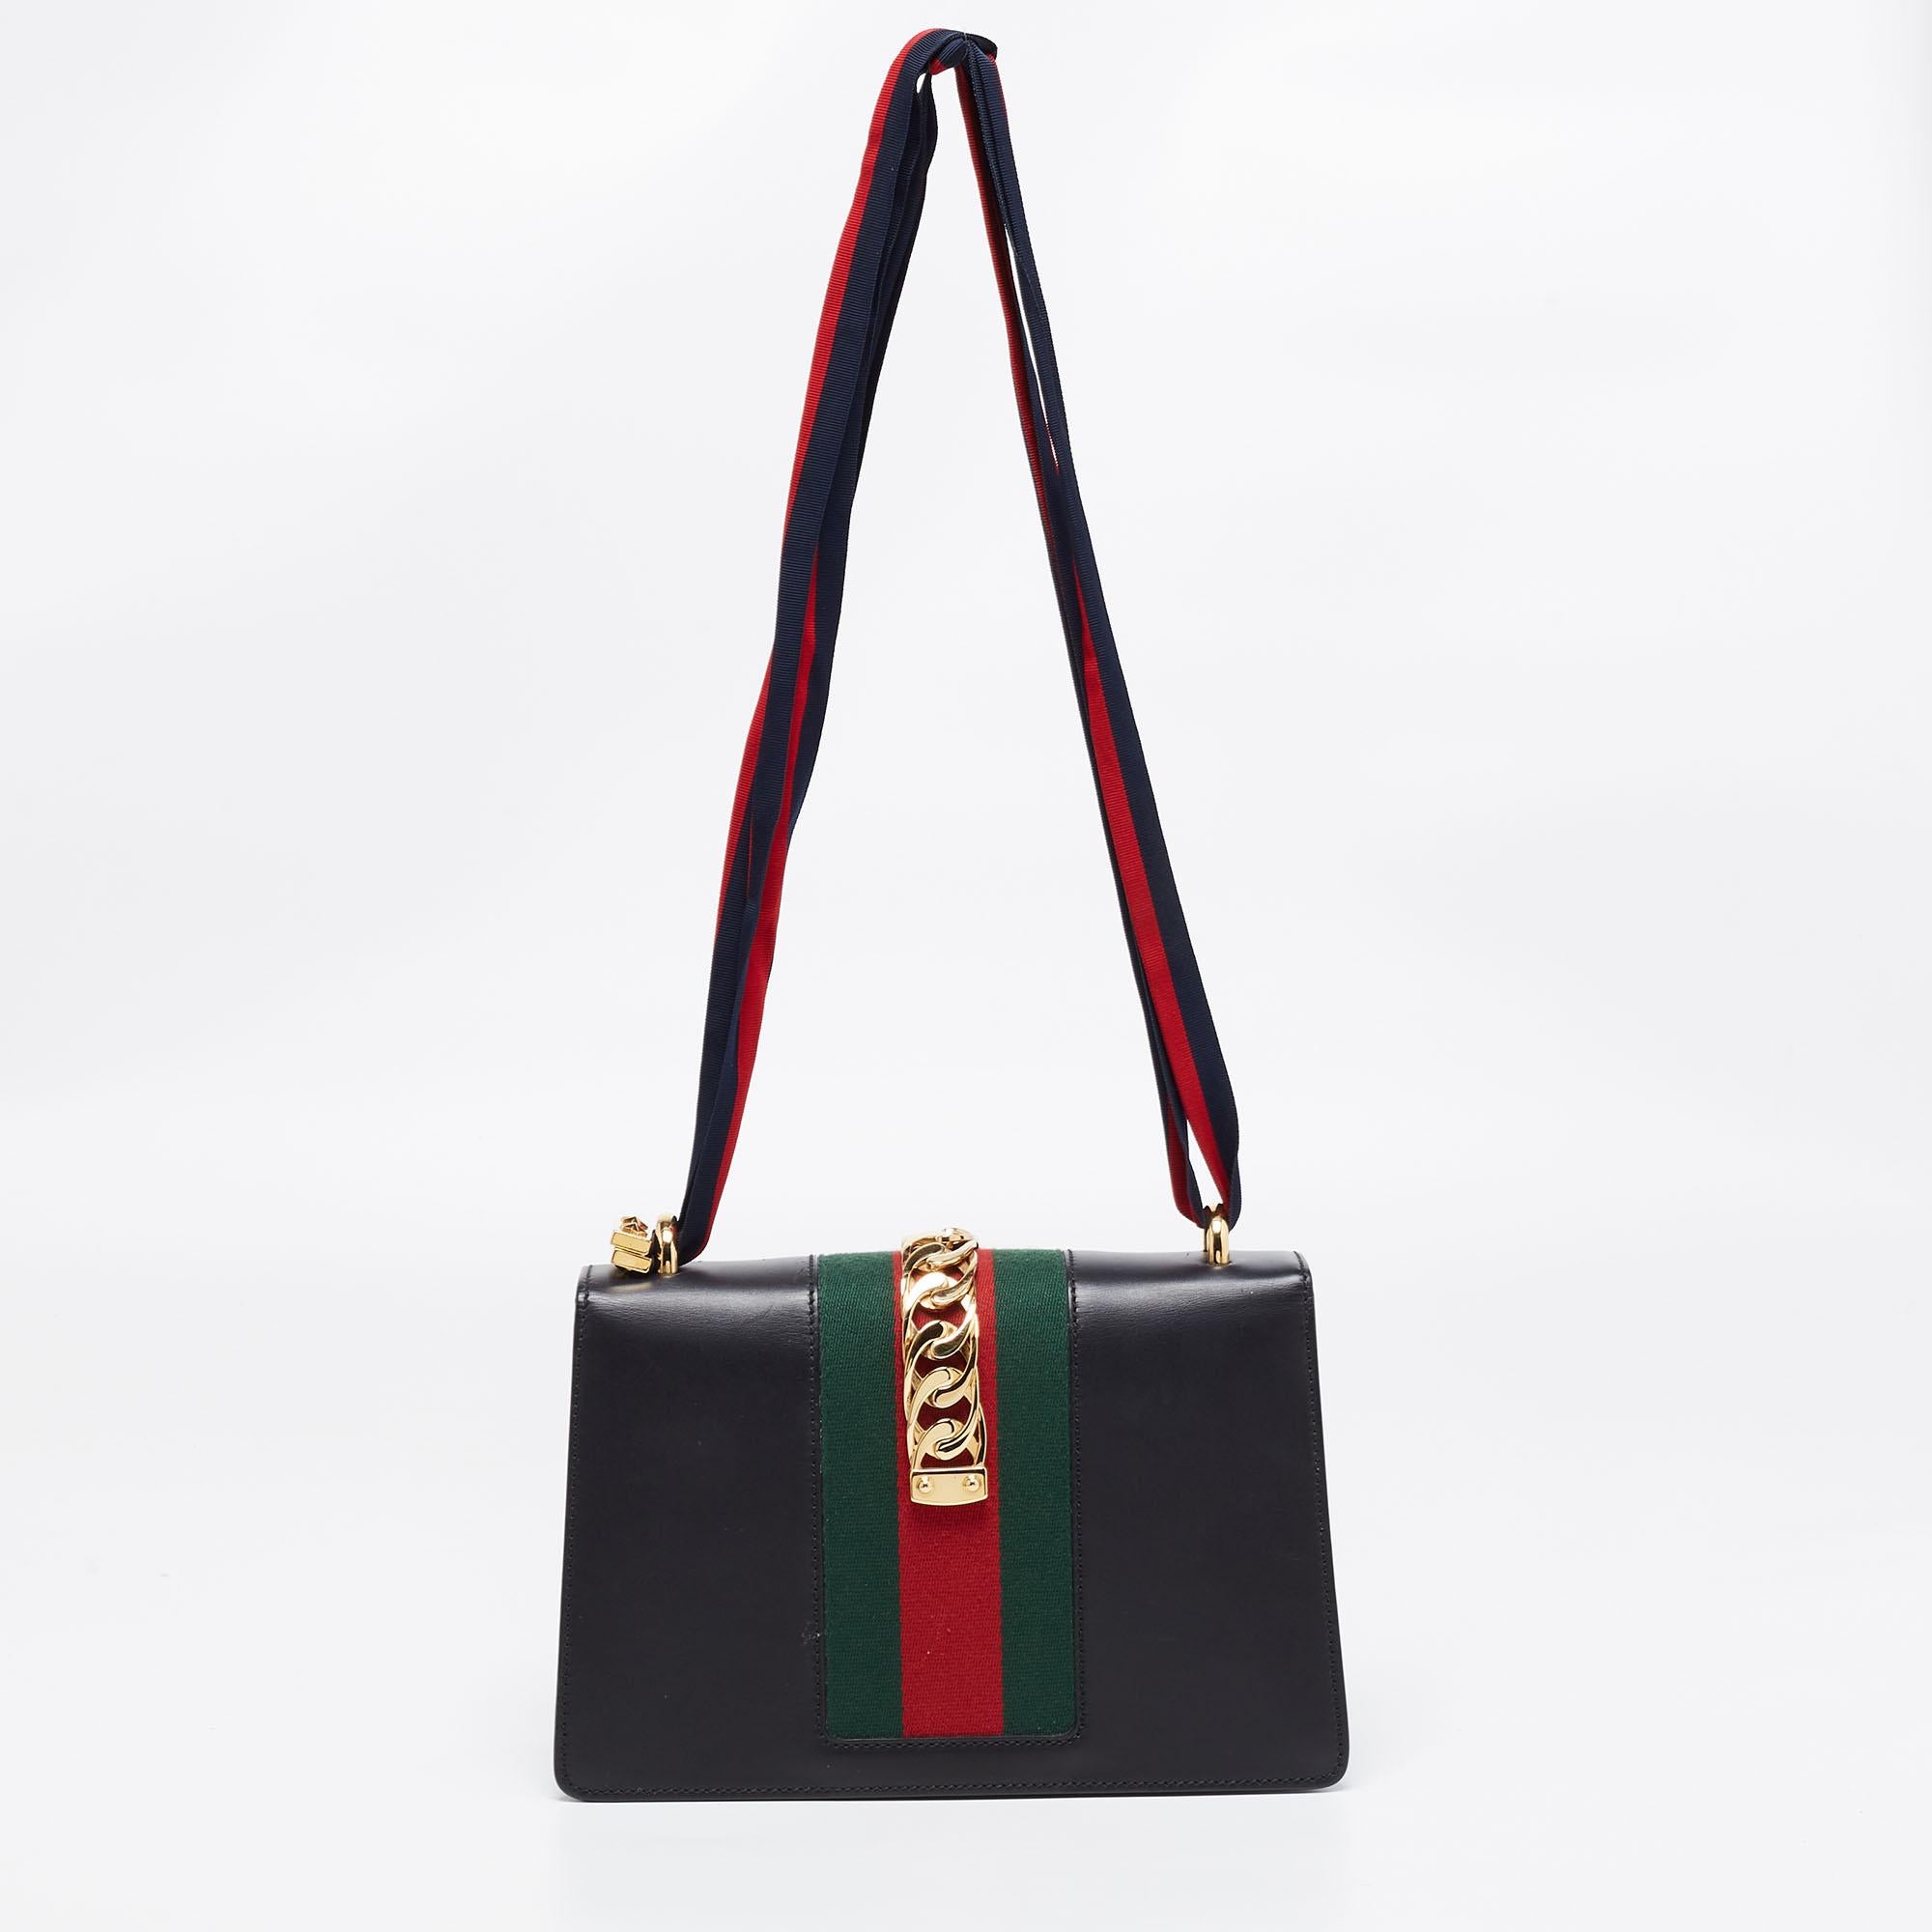 All the designs from Gucci, like this Sylvie bag, reflect a sense of innovation and tradition. Crafted from leather, it is admired for its alluring finish and structured silhouette. The handle at the top makes it practical, and the signature